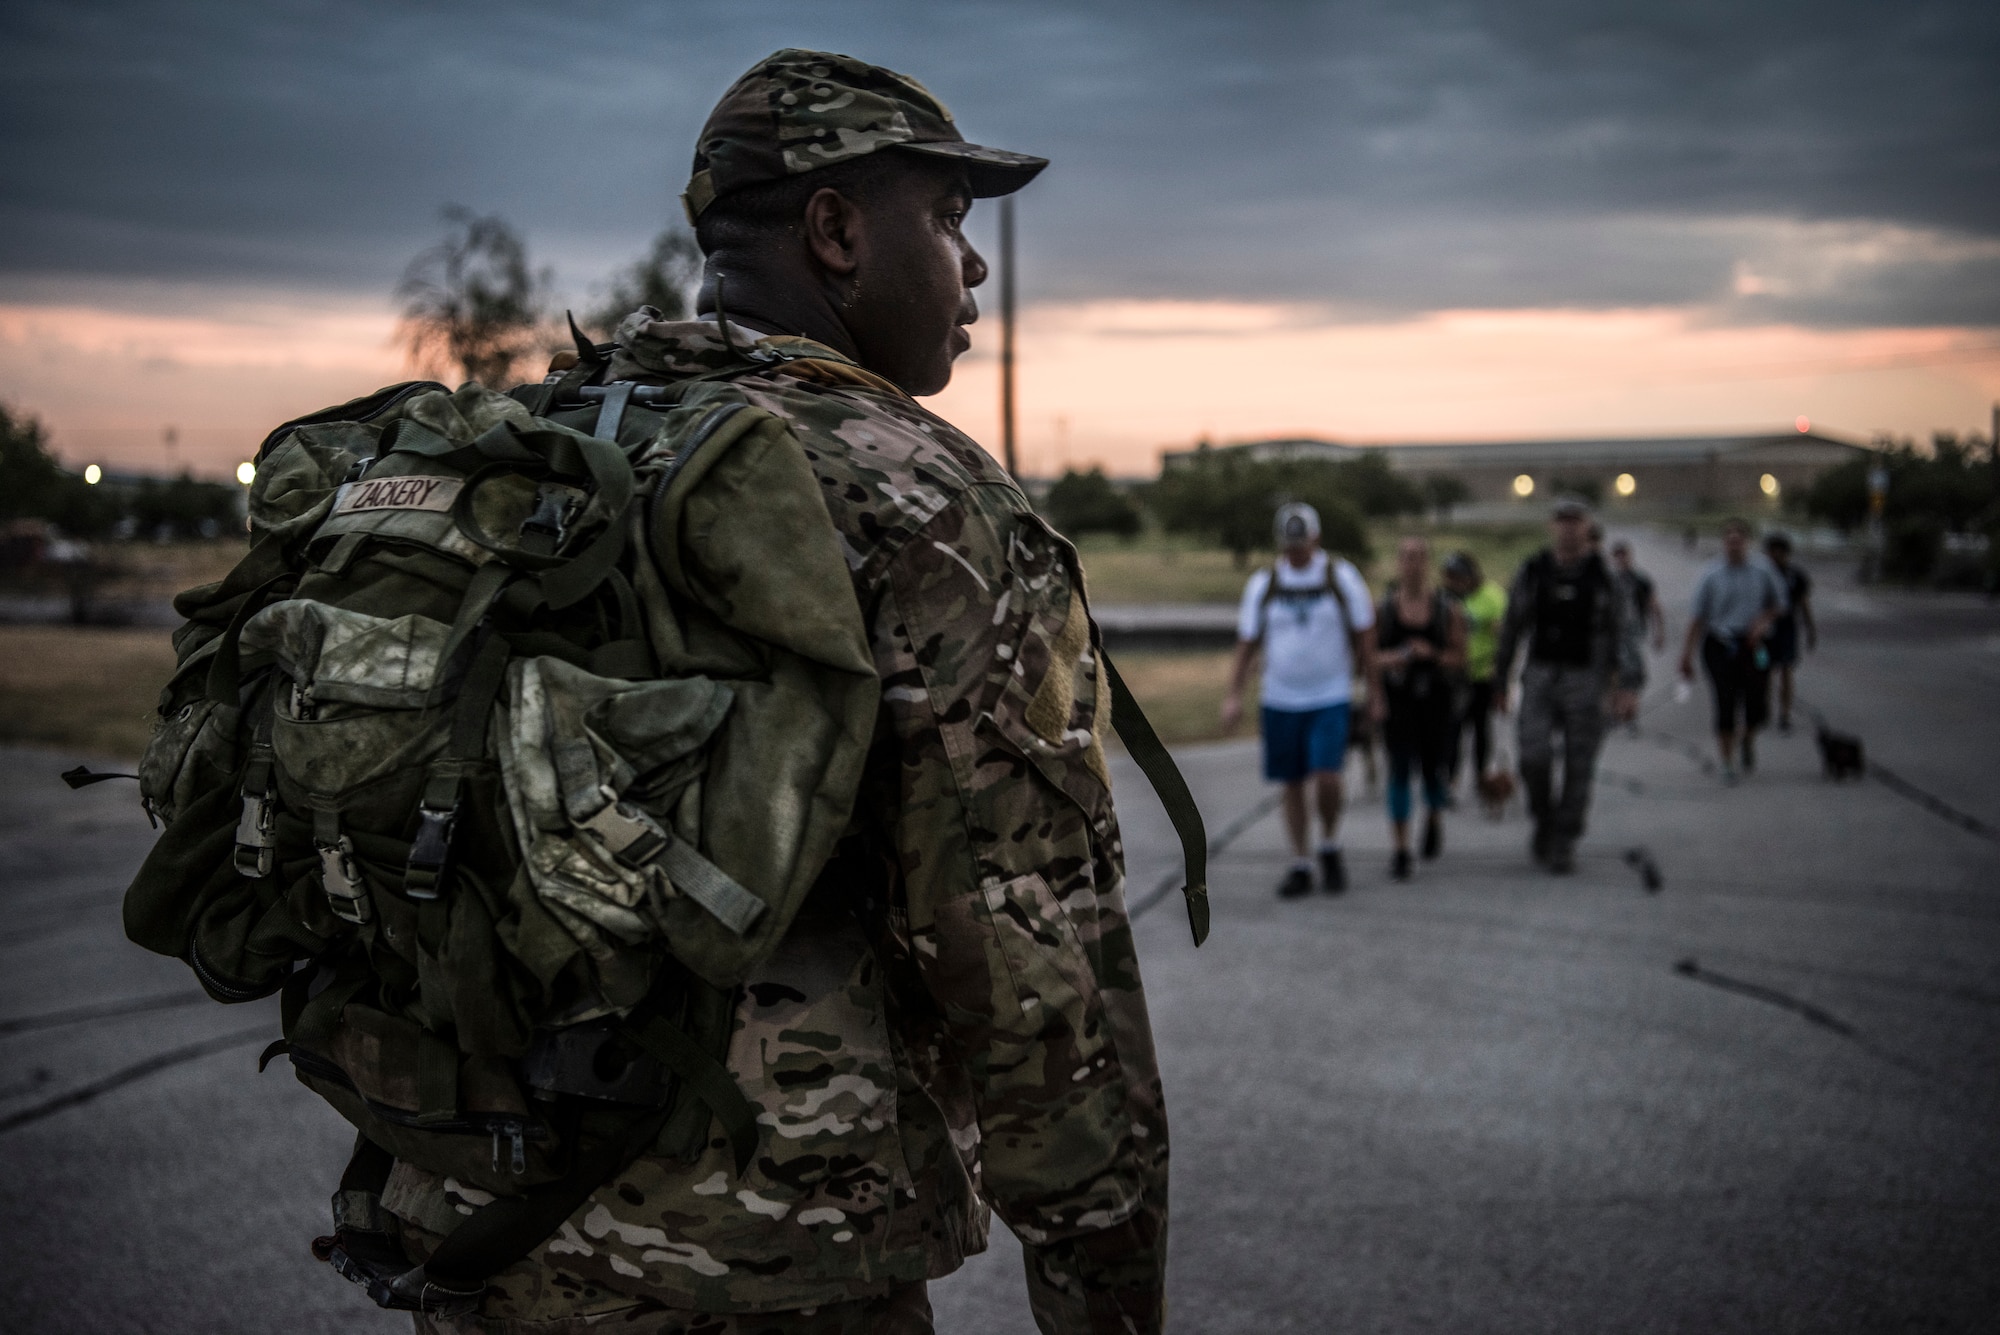 47th Flying Training Wing Command Chief Master Sgt. Robert Zackery III, waits for Airmen at the finish line during the “Walk with the Chief” ruck march on Laughlin Air Force Base, Texas. July 23, 2019. “Walk with the Chief” is a monthly opportunity to interact with Laughlin’s command chief, Chief Master Sgt. Robert Zackery III, in a fun and informal setting, and prepare Airmen for a deployed environment. (U.S. Air Force photo by Airman 1st Class Marco A. Gomez)